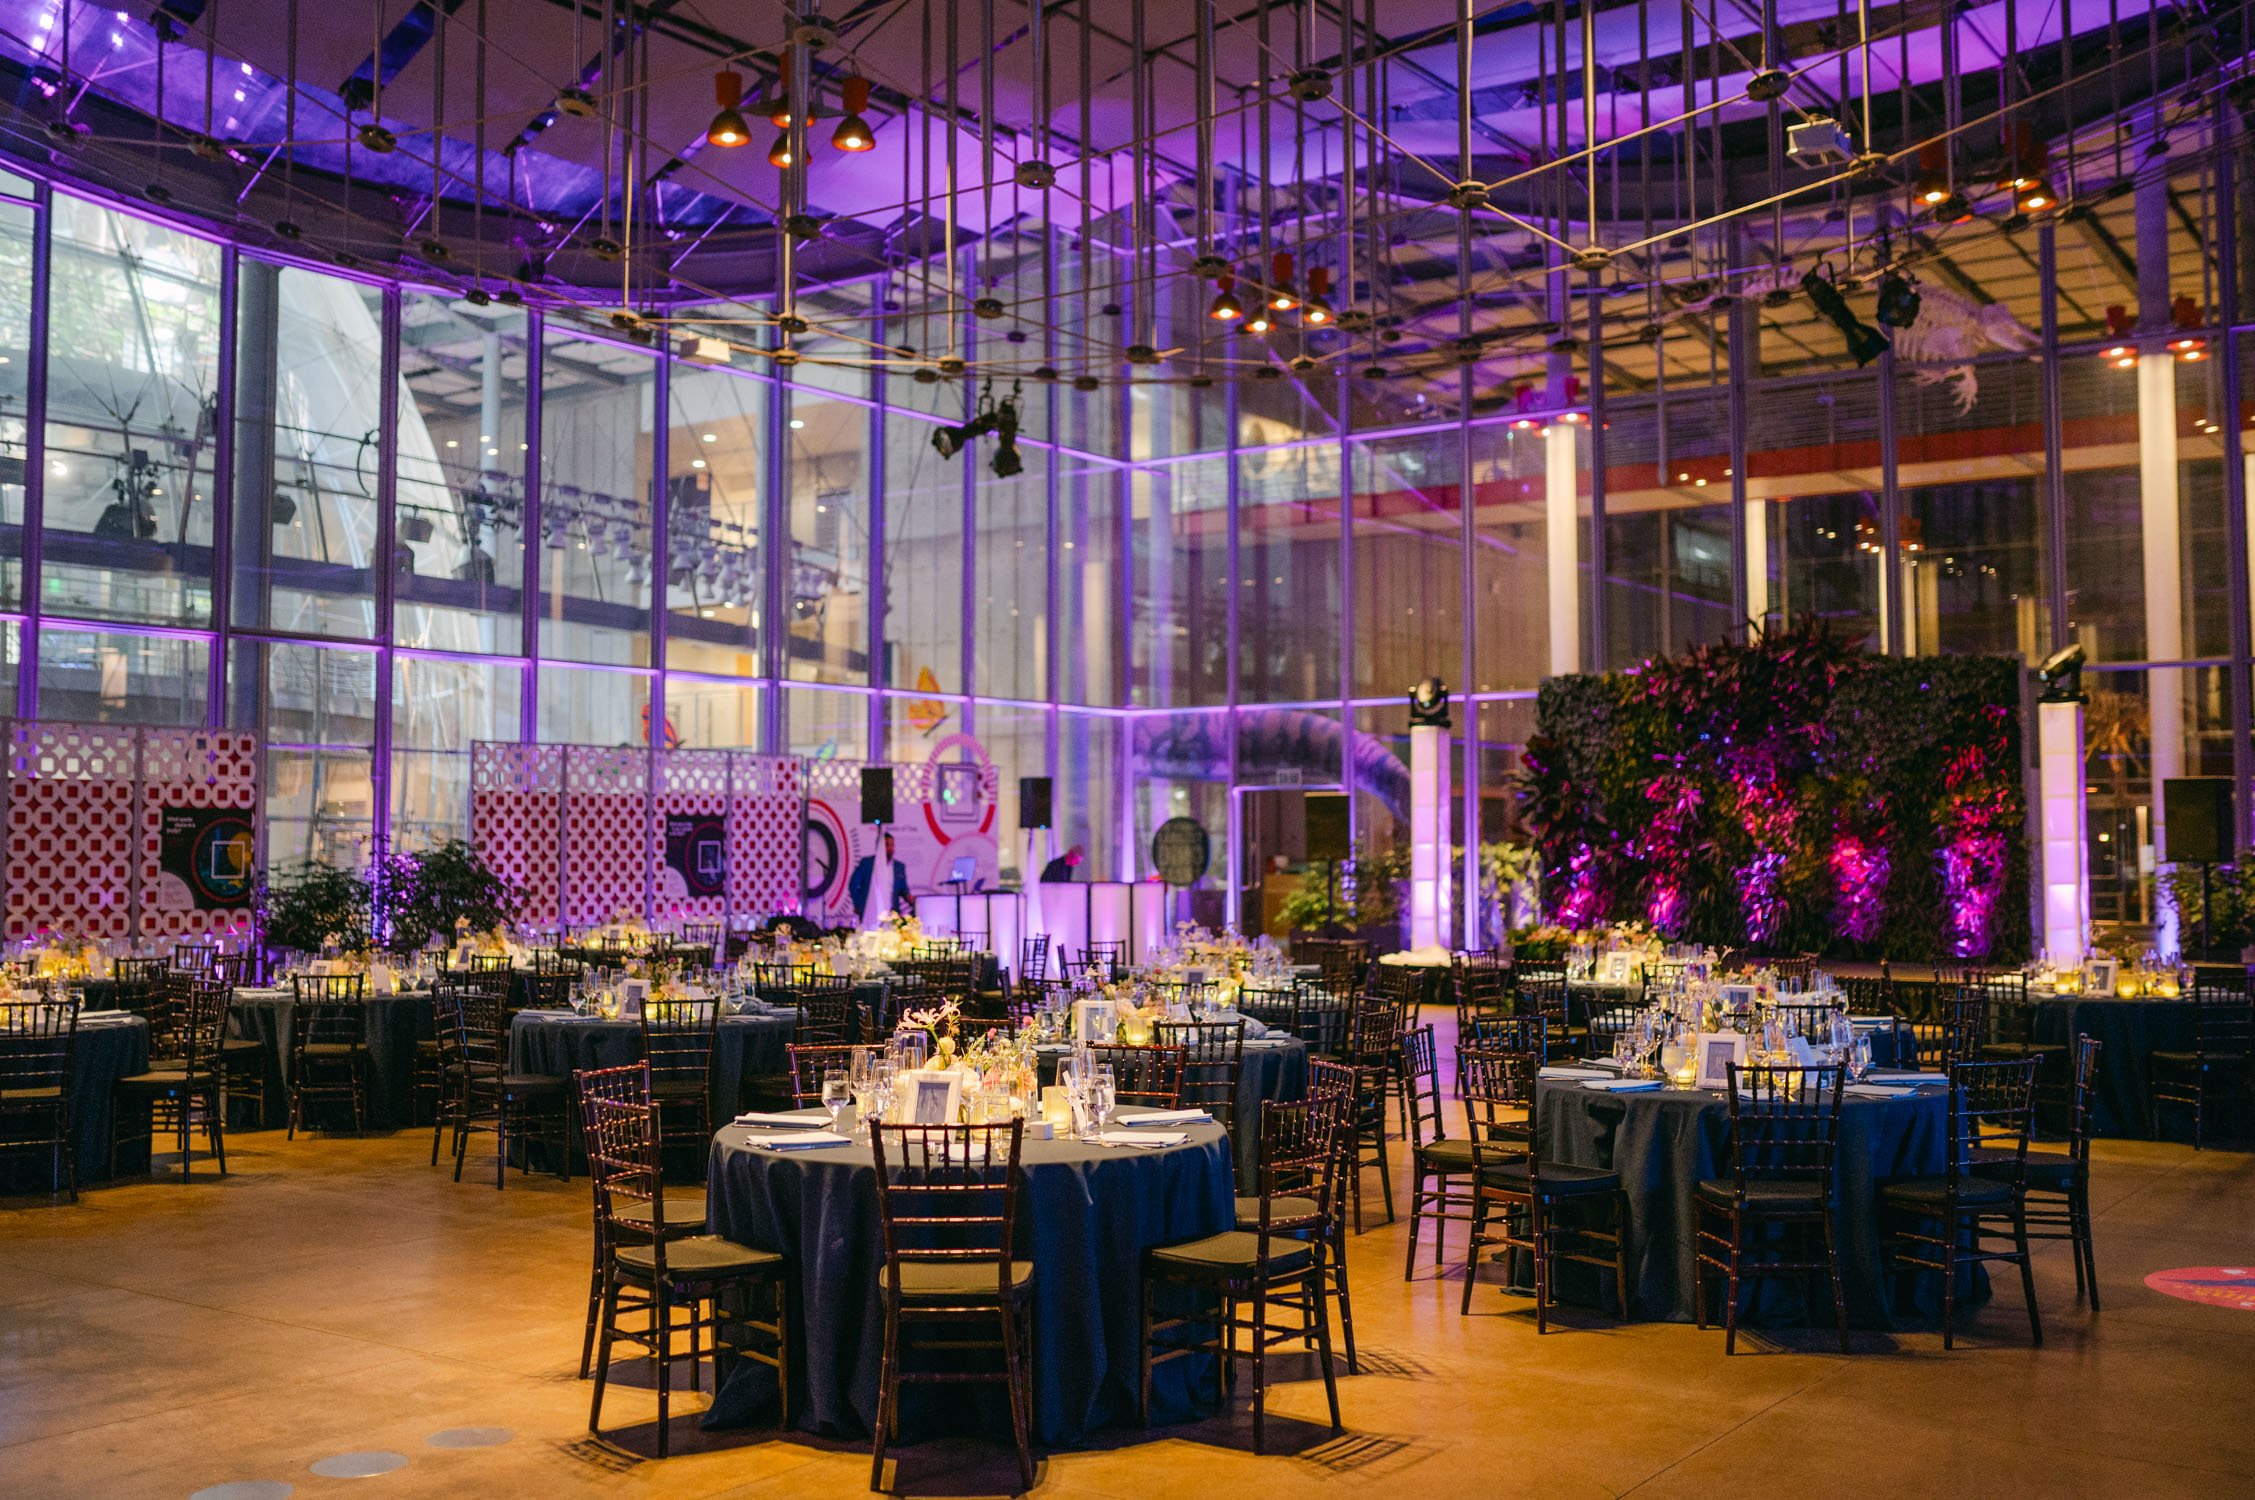 California academy of Sciences in San Francisco Wedding, photo of the wedding reception setup with ambient lighting